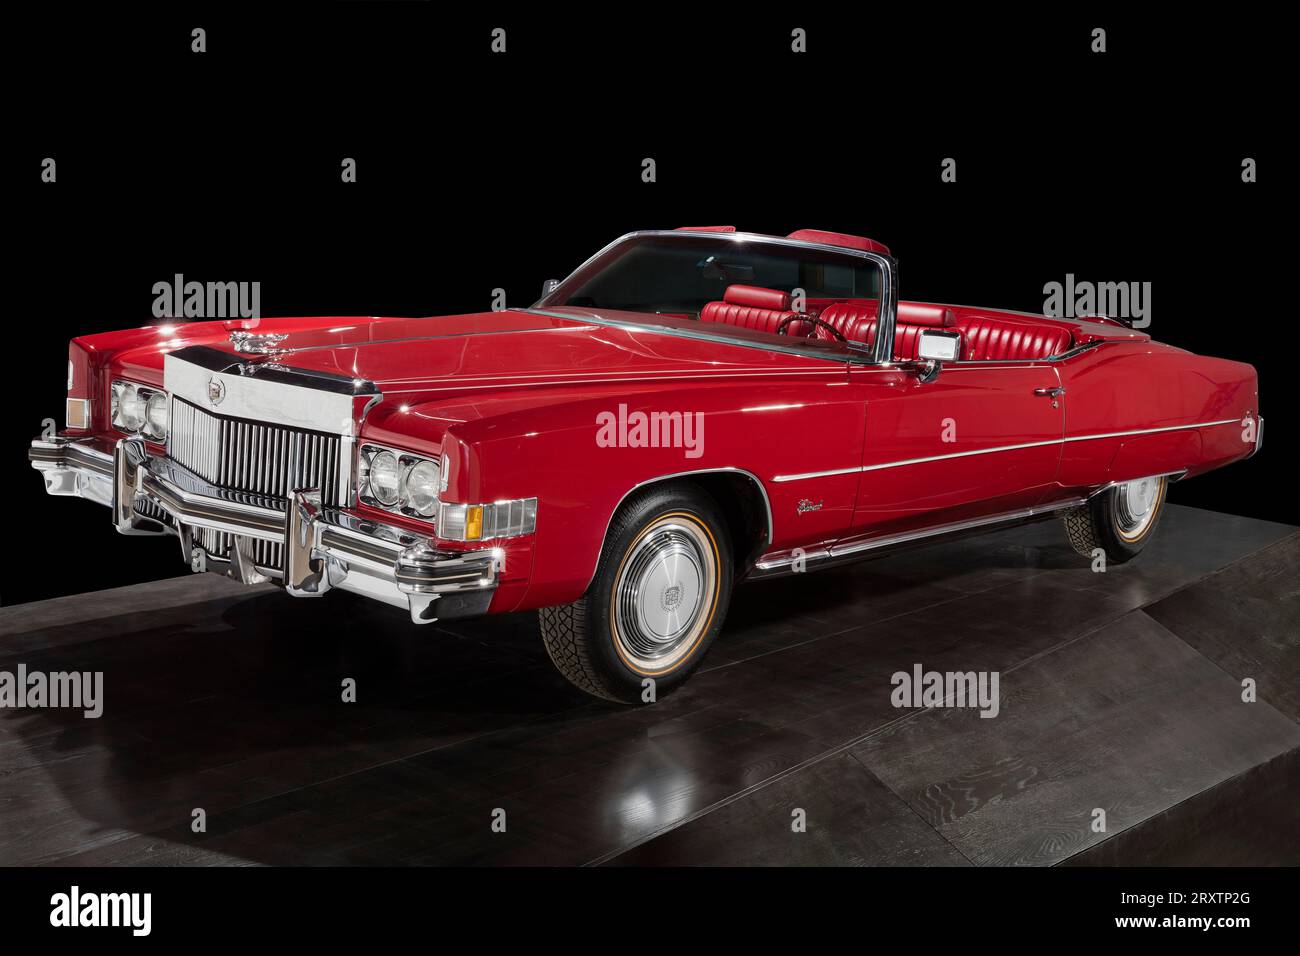 A red Cadillac Eldorado, model year 1973, owned and driven by Chuck Berry. Stock Photo